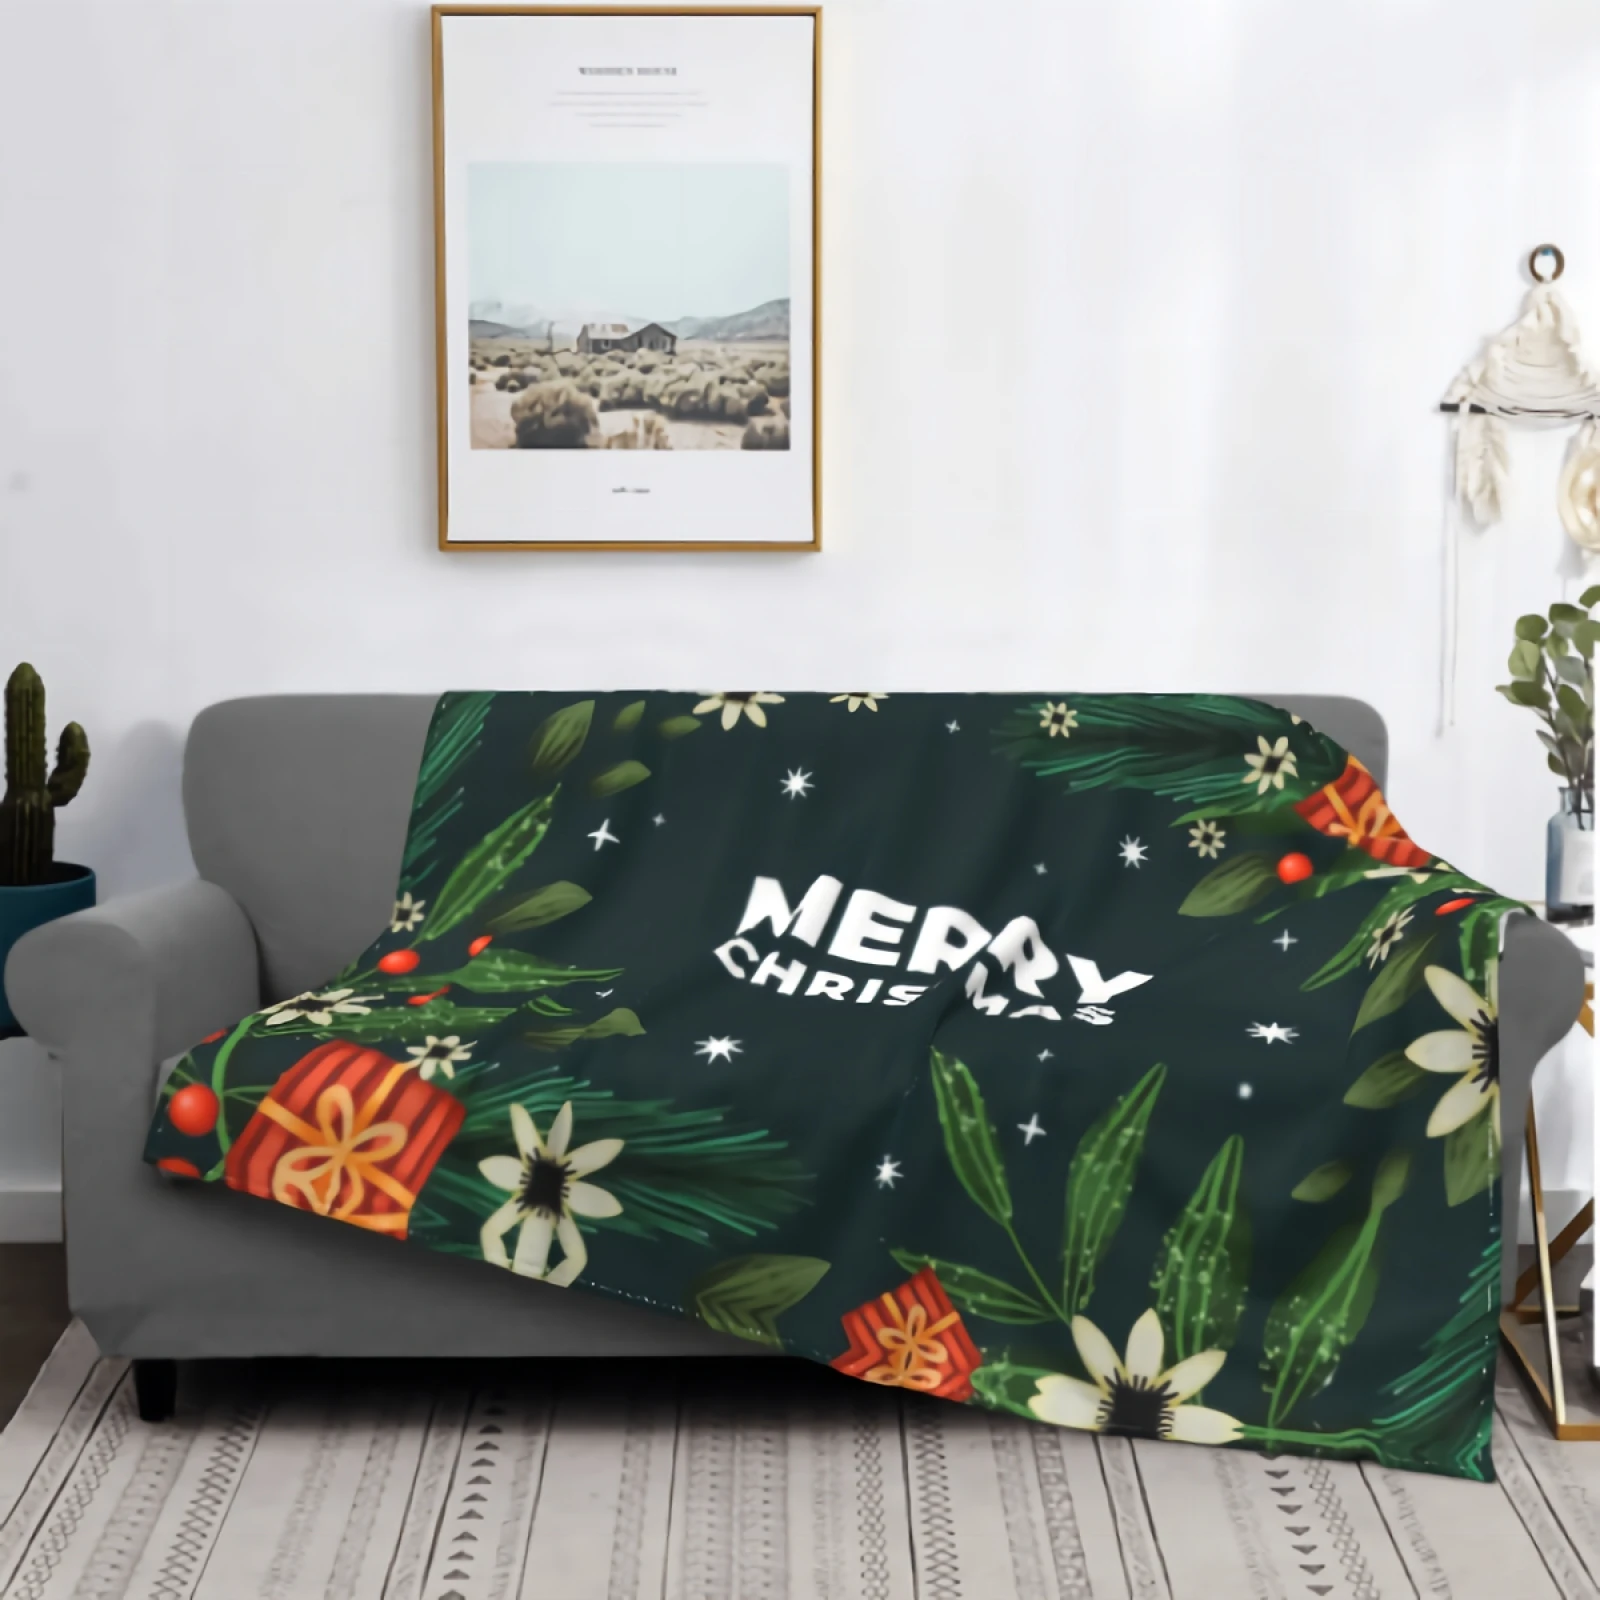 

Watercolor Christmas Super Soft Throw Blanket for Bed Couch Sofa Lightweight Travelling Throw Size for Kids Adults All Season